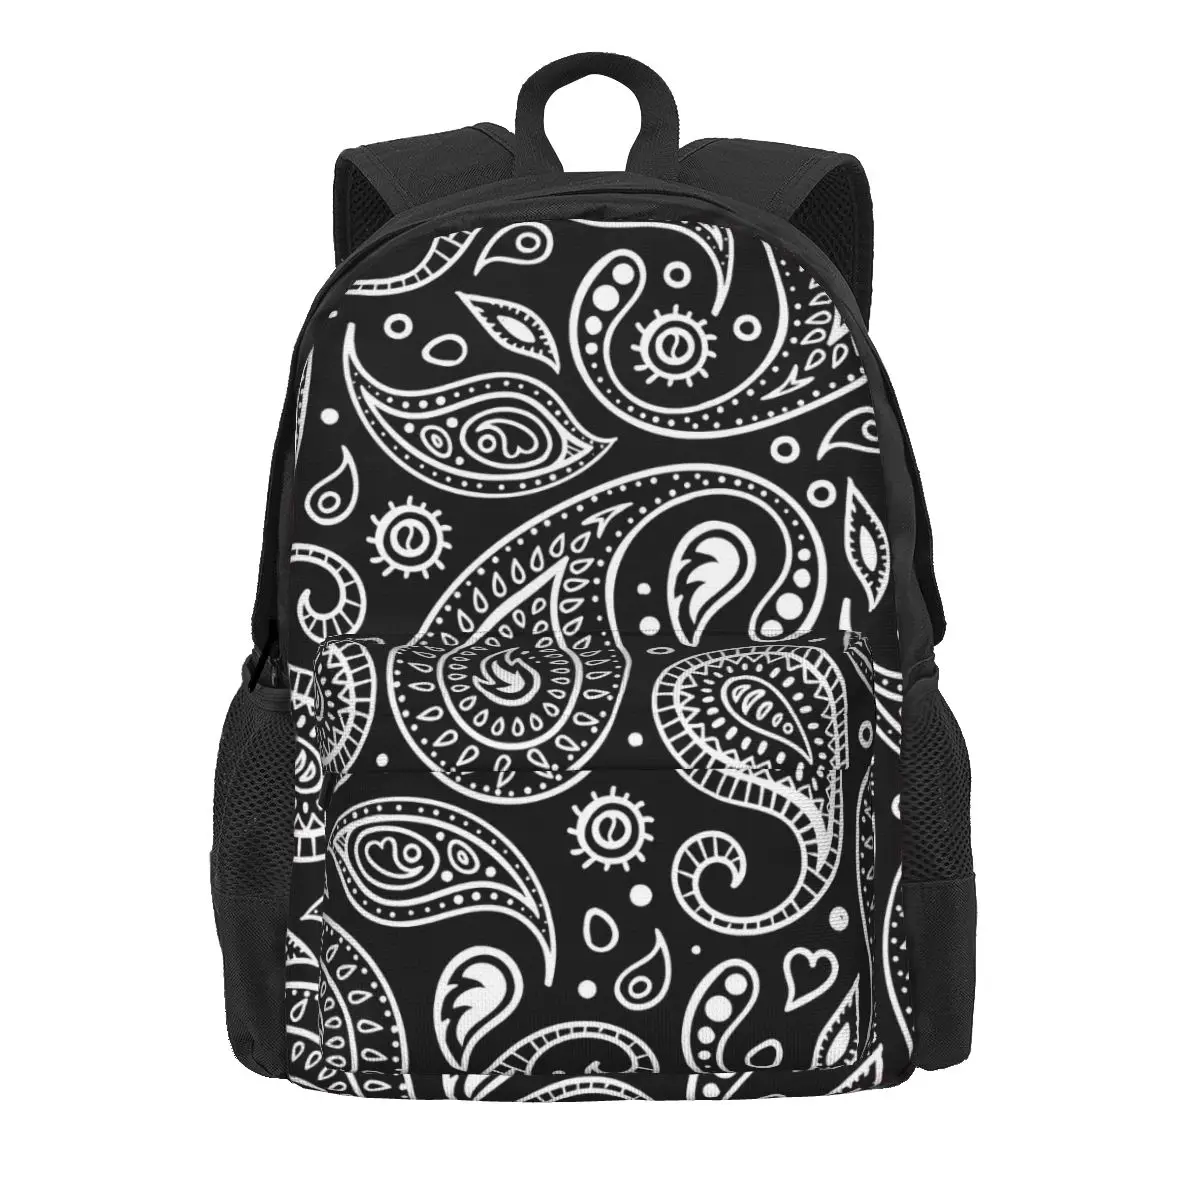 

Paisley Design Backpack Black and White Outdoor Backpacks Boy Girl High Quality Breathable High School Bags Fun Rucksack